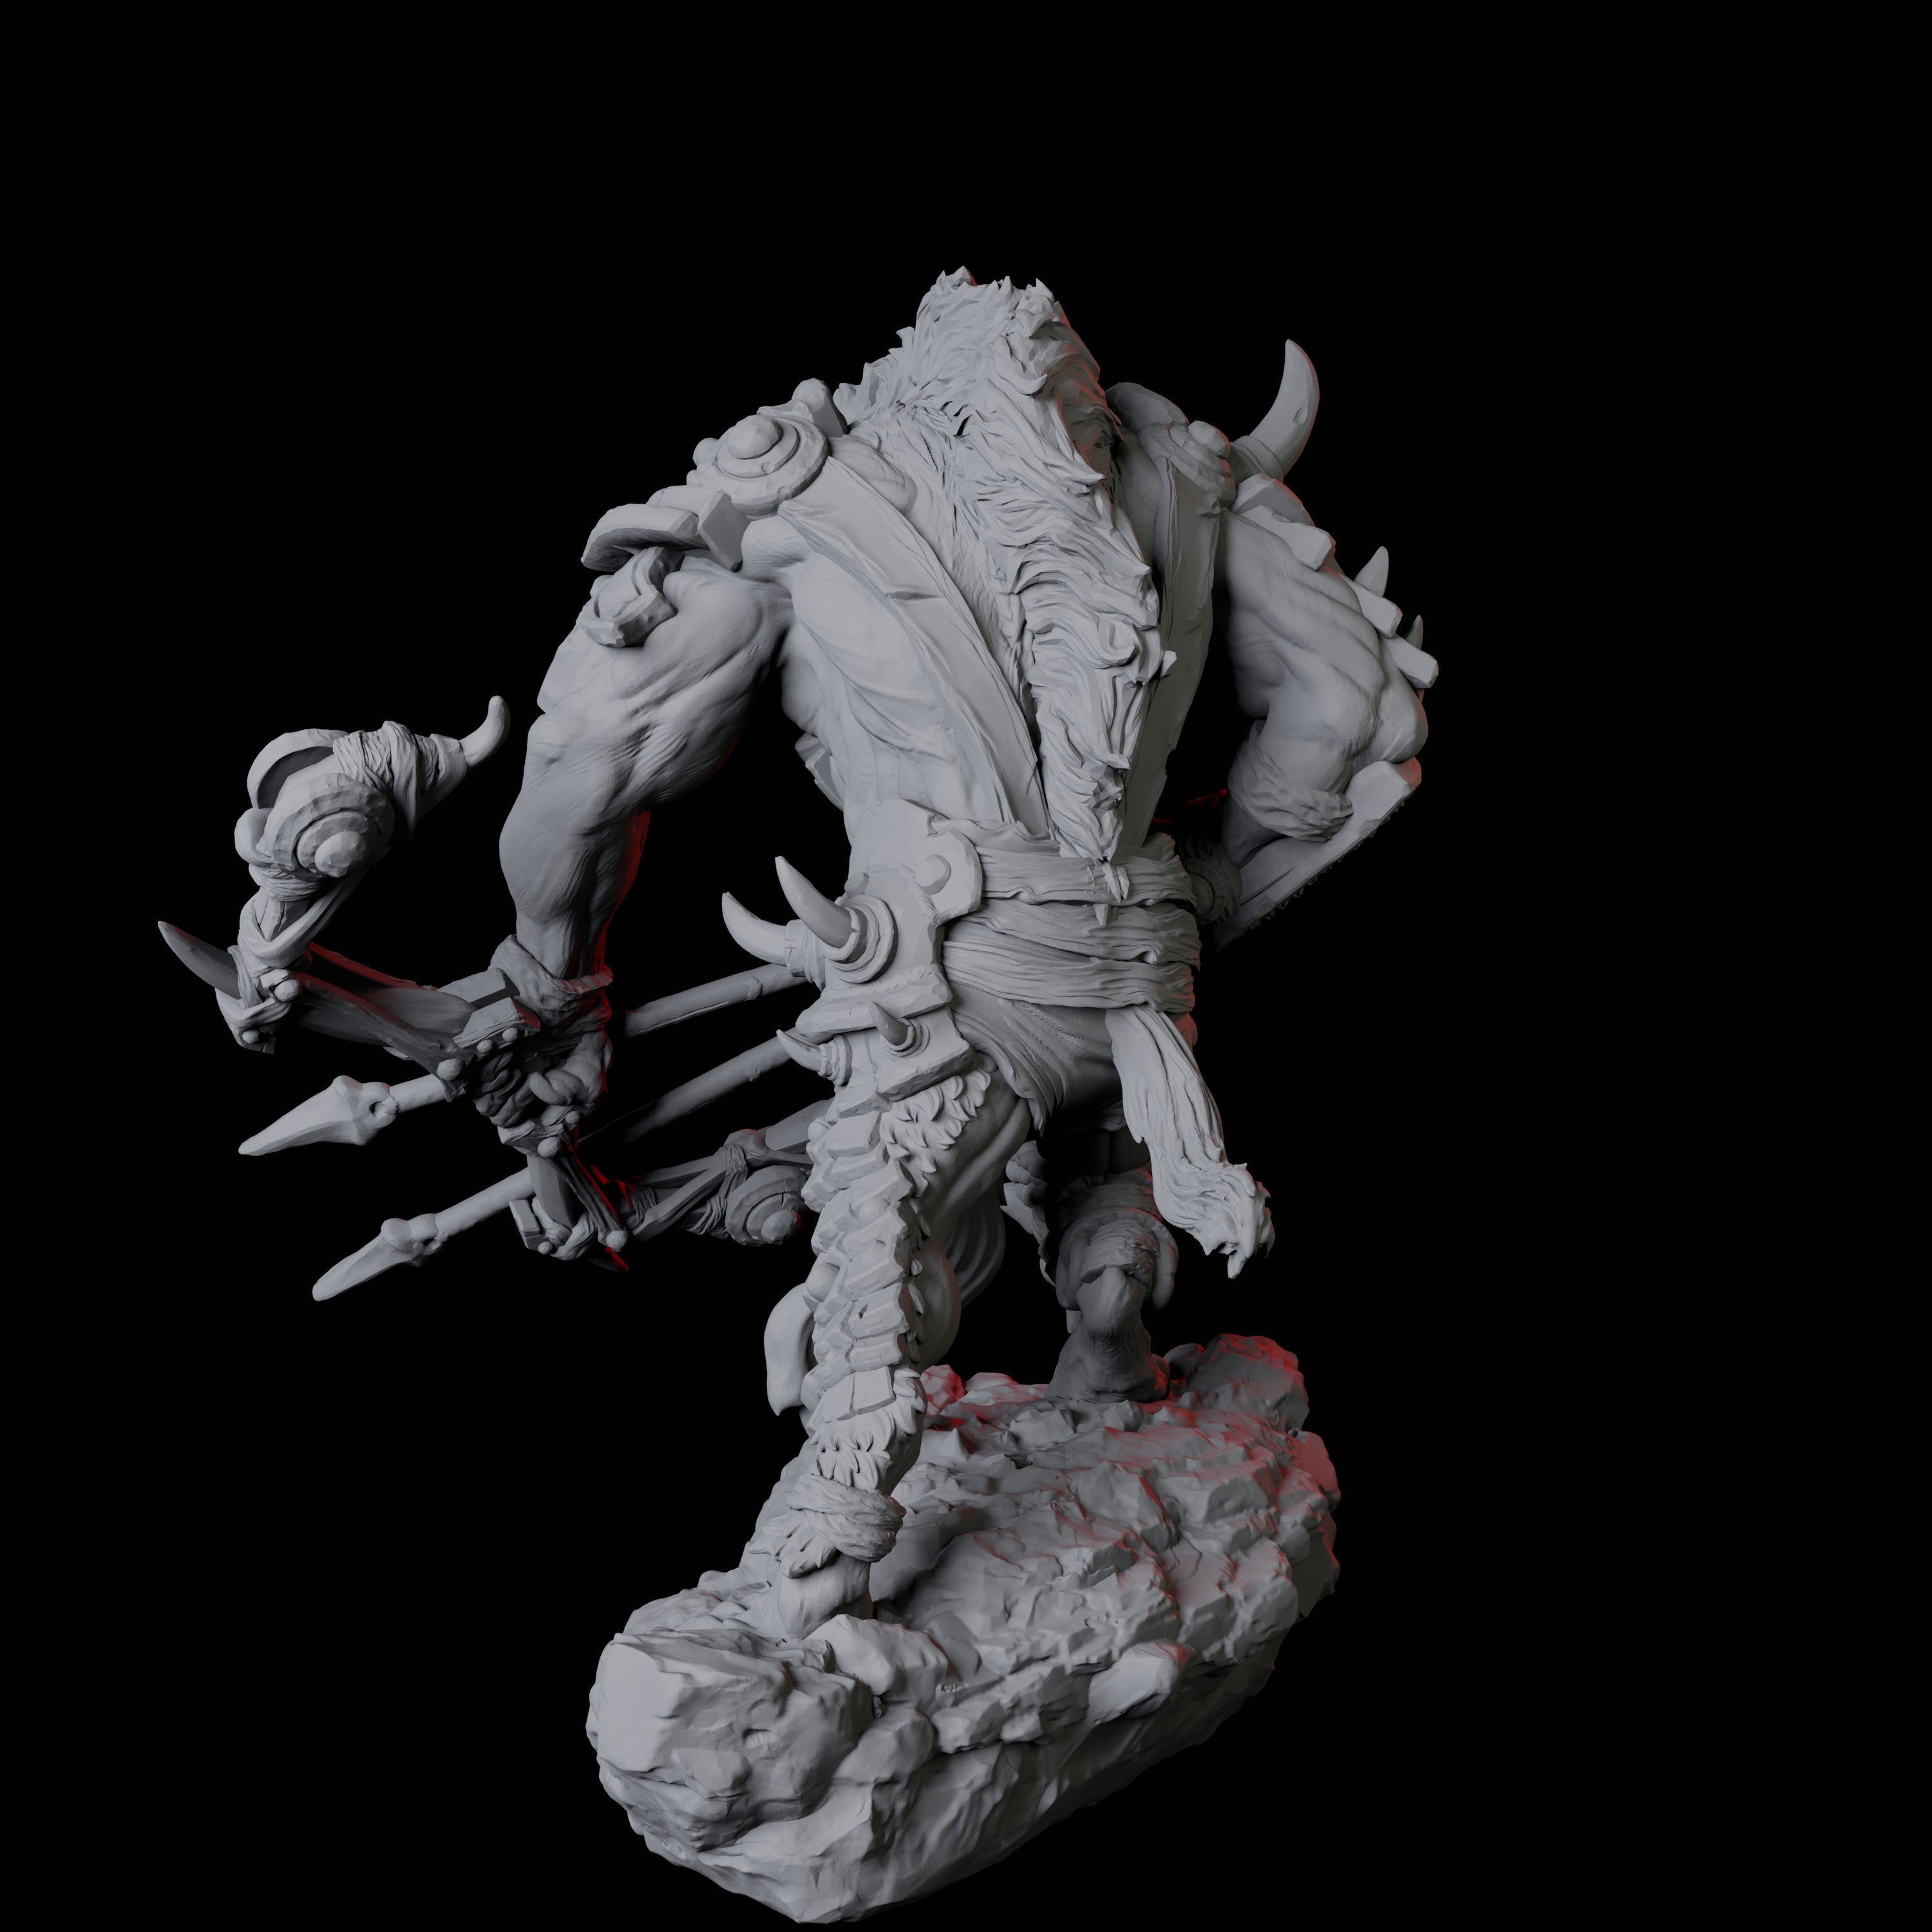 Gnoll Scout C Miniature for Dungeons and Dragons, Pathfinder or other TTRPGs